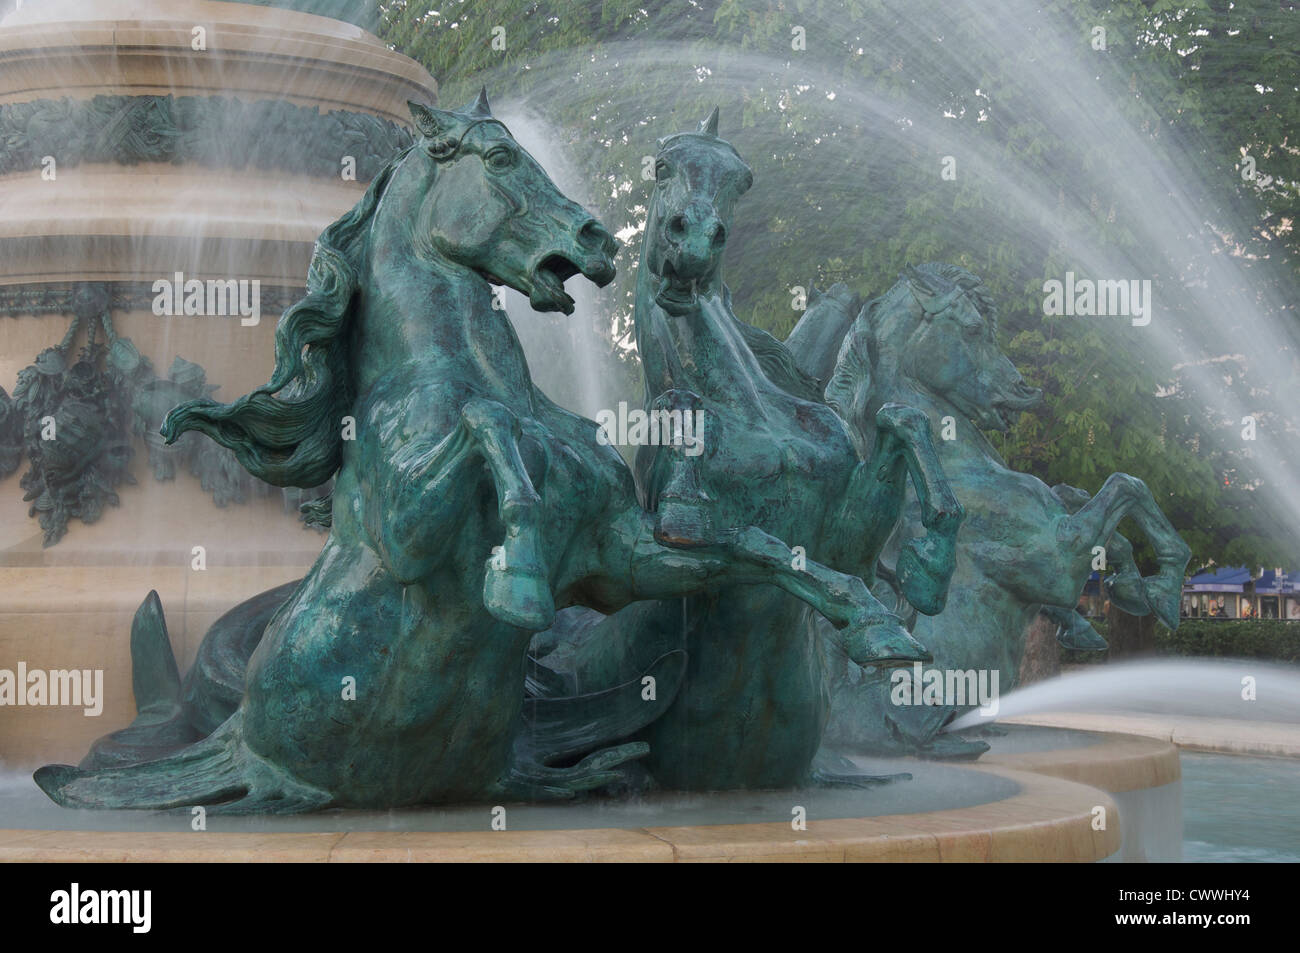 Fountains. Galloping horses charge through the water jets of the monumental Fontaine de l’Observatoire in the Jardin Marco Polo. Paris, France. Stock Photo